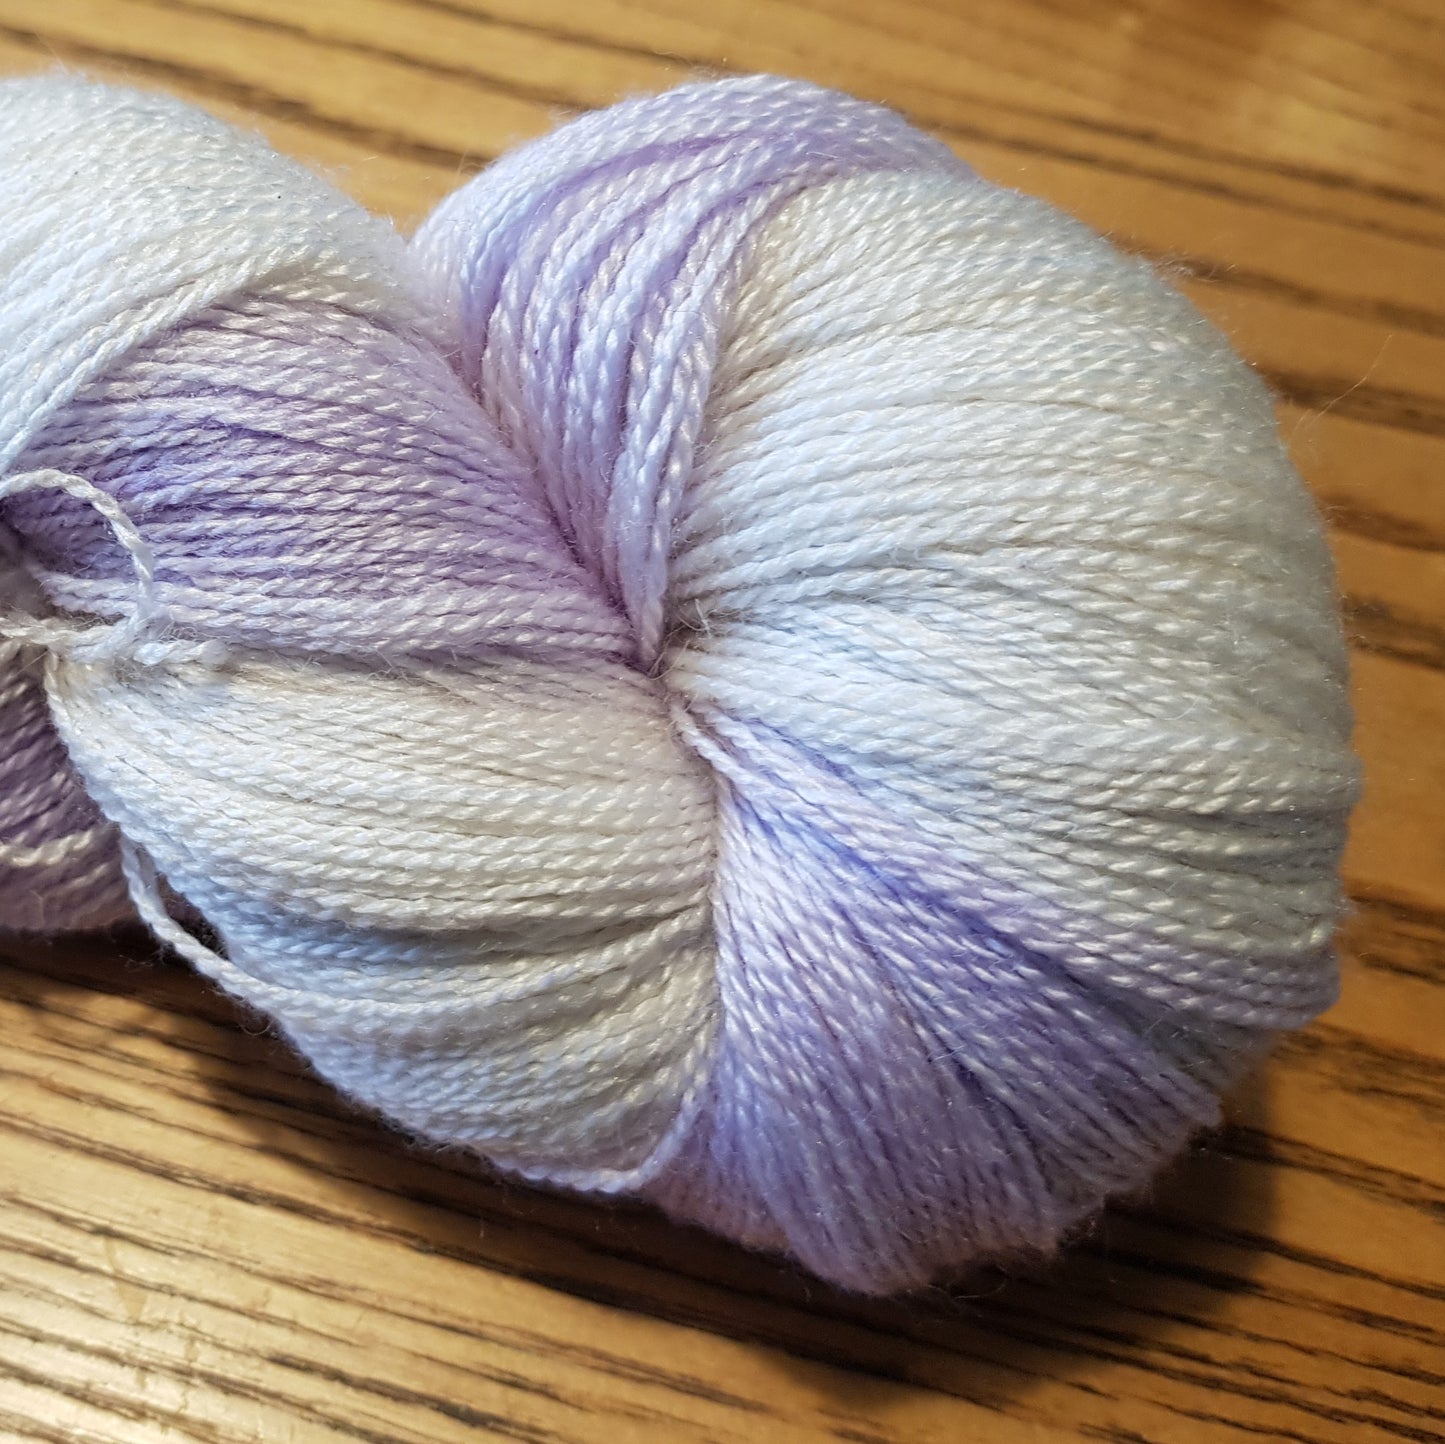 100G Bluefaced Leicester and silk hand dyed Lace Weight Yarn- "lilac  blush" - *SALE*